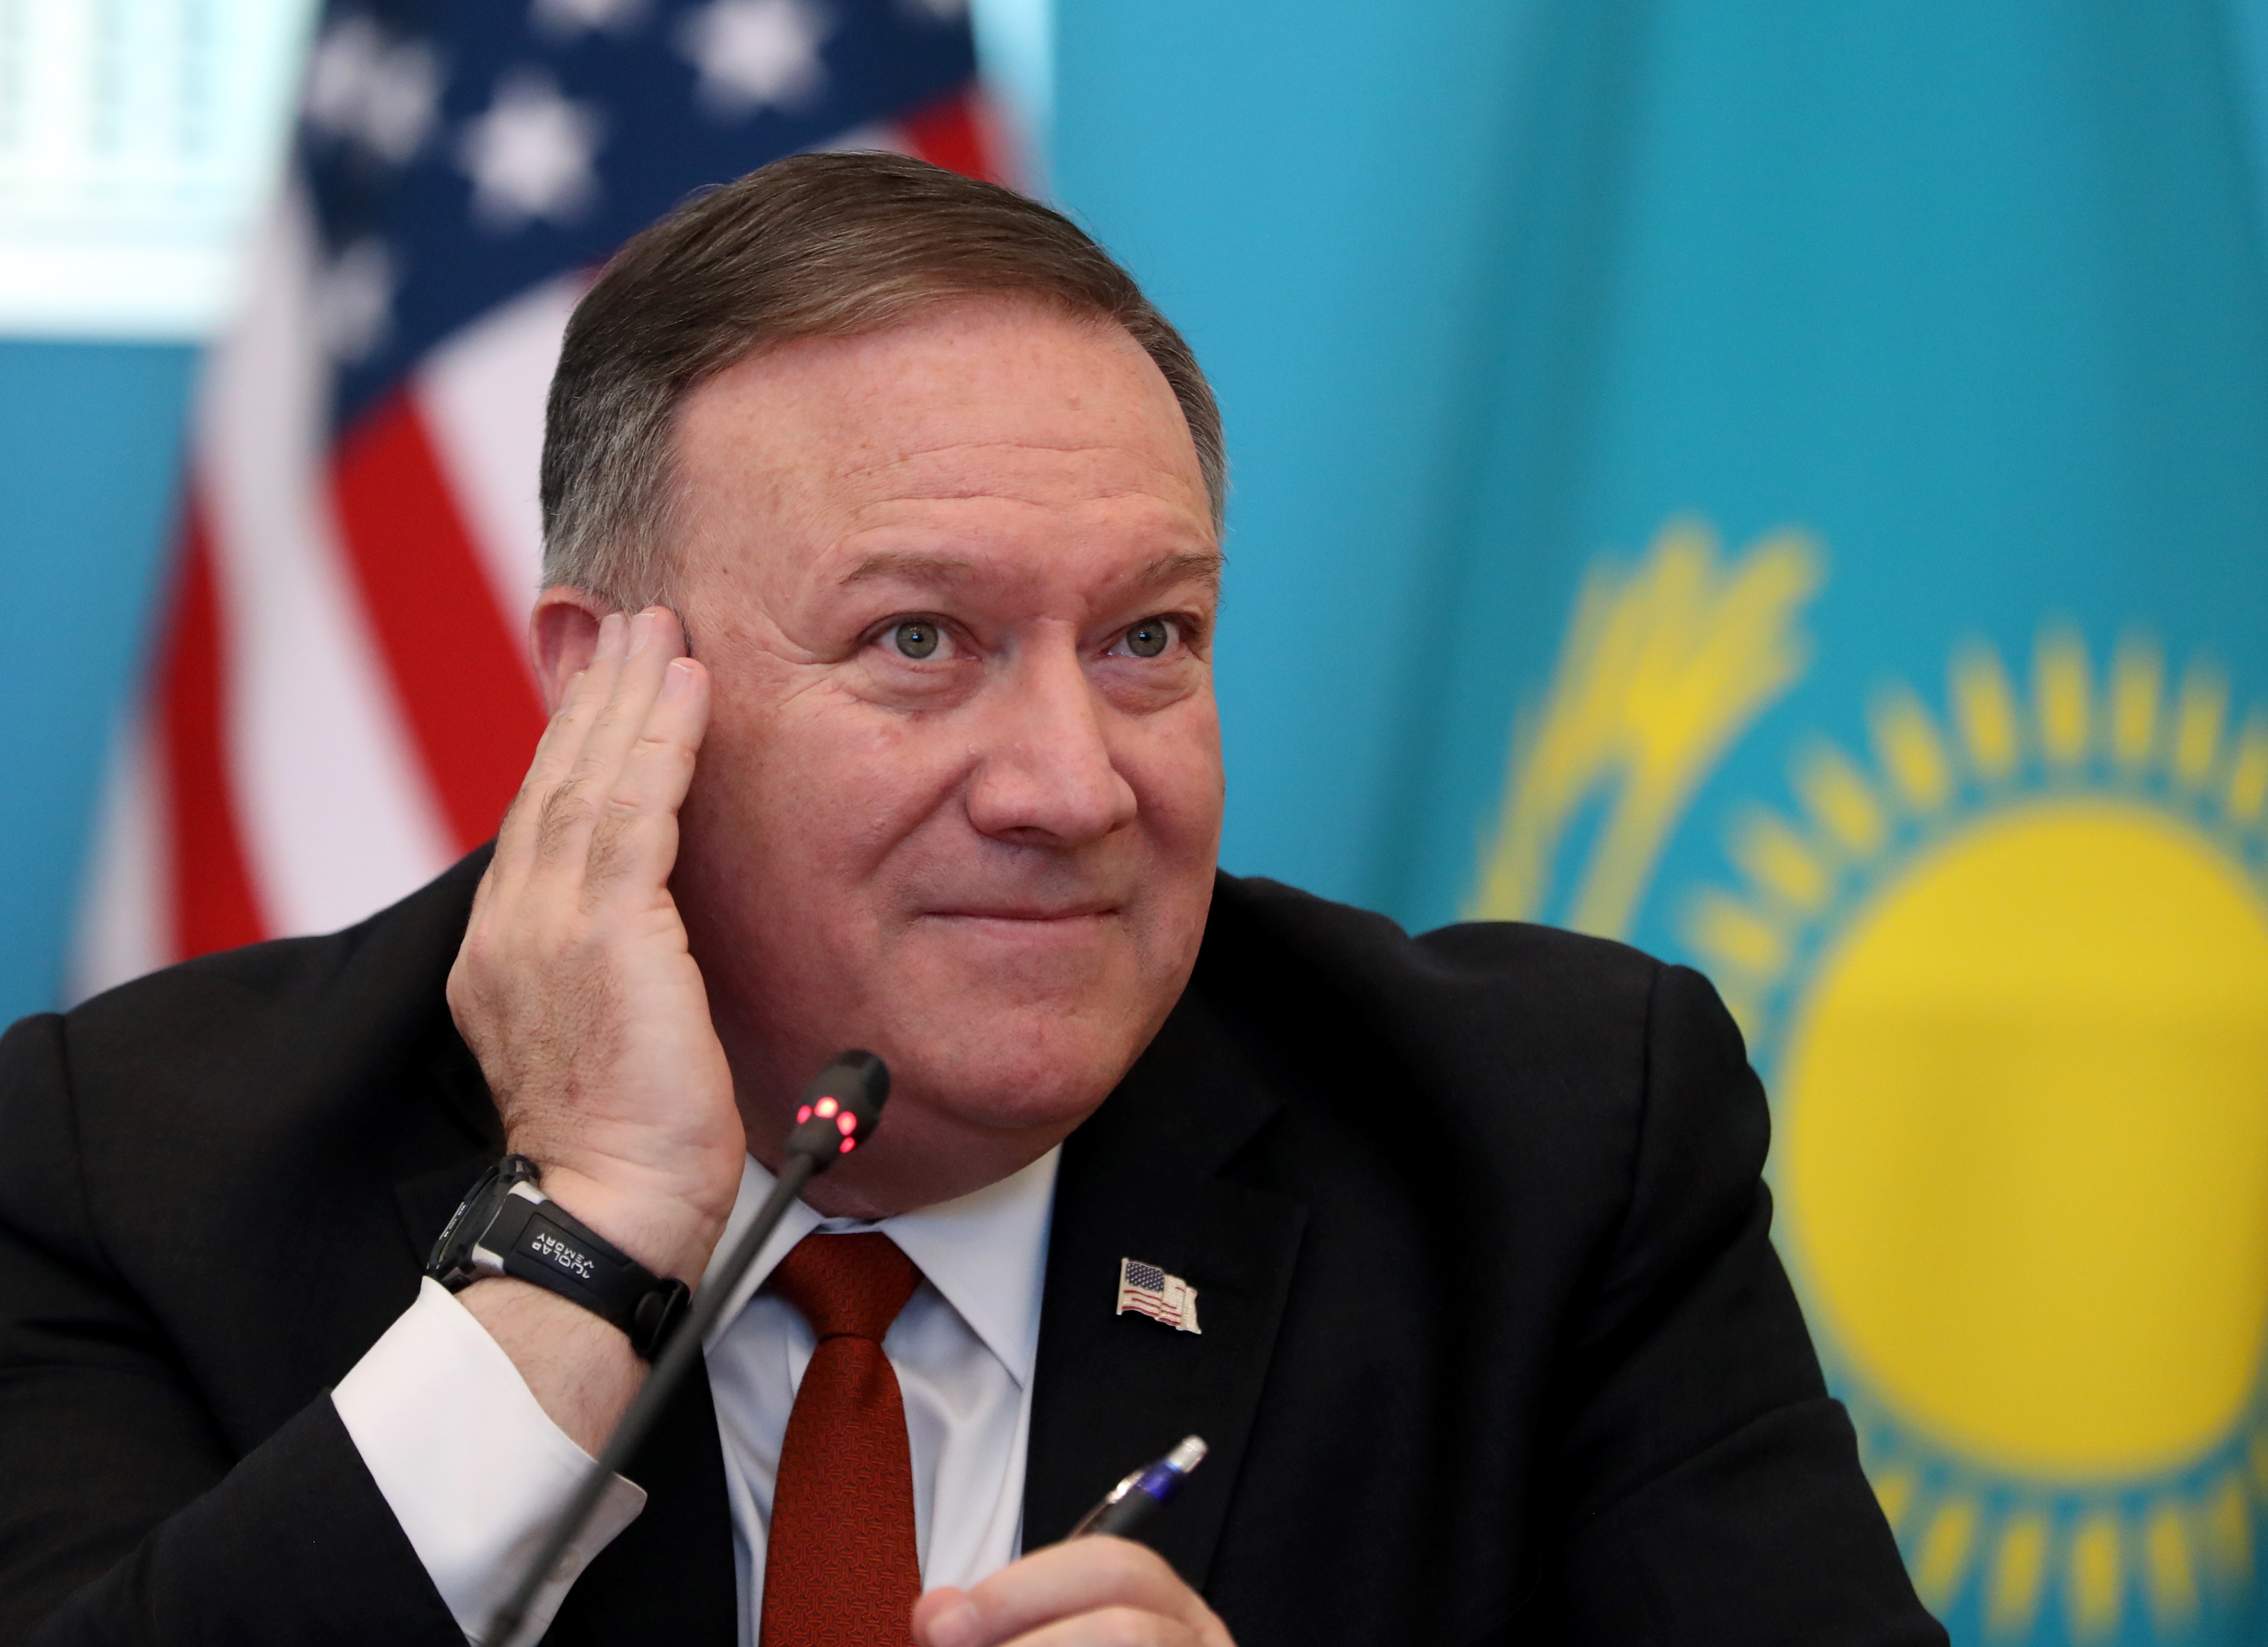 US Secretary of State Mike Pompeo attends a joint press conference with Kazakh Foreign Minister Mukhtar Tleuberdi in Nur-Sultan, Kazakhstan, on February 2. Photo: EPA-EFE